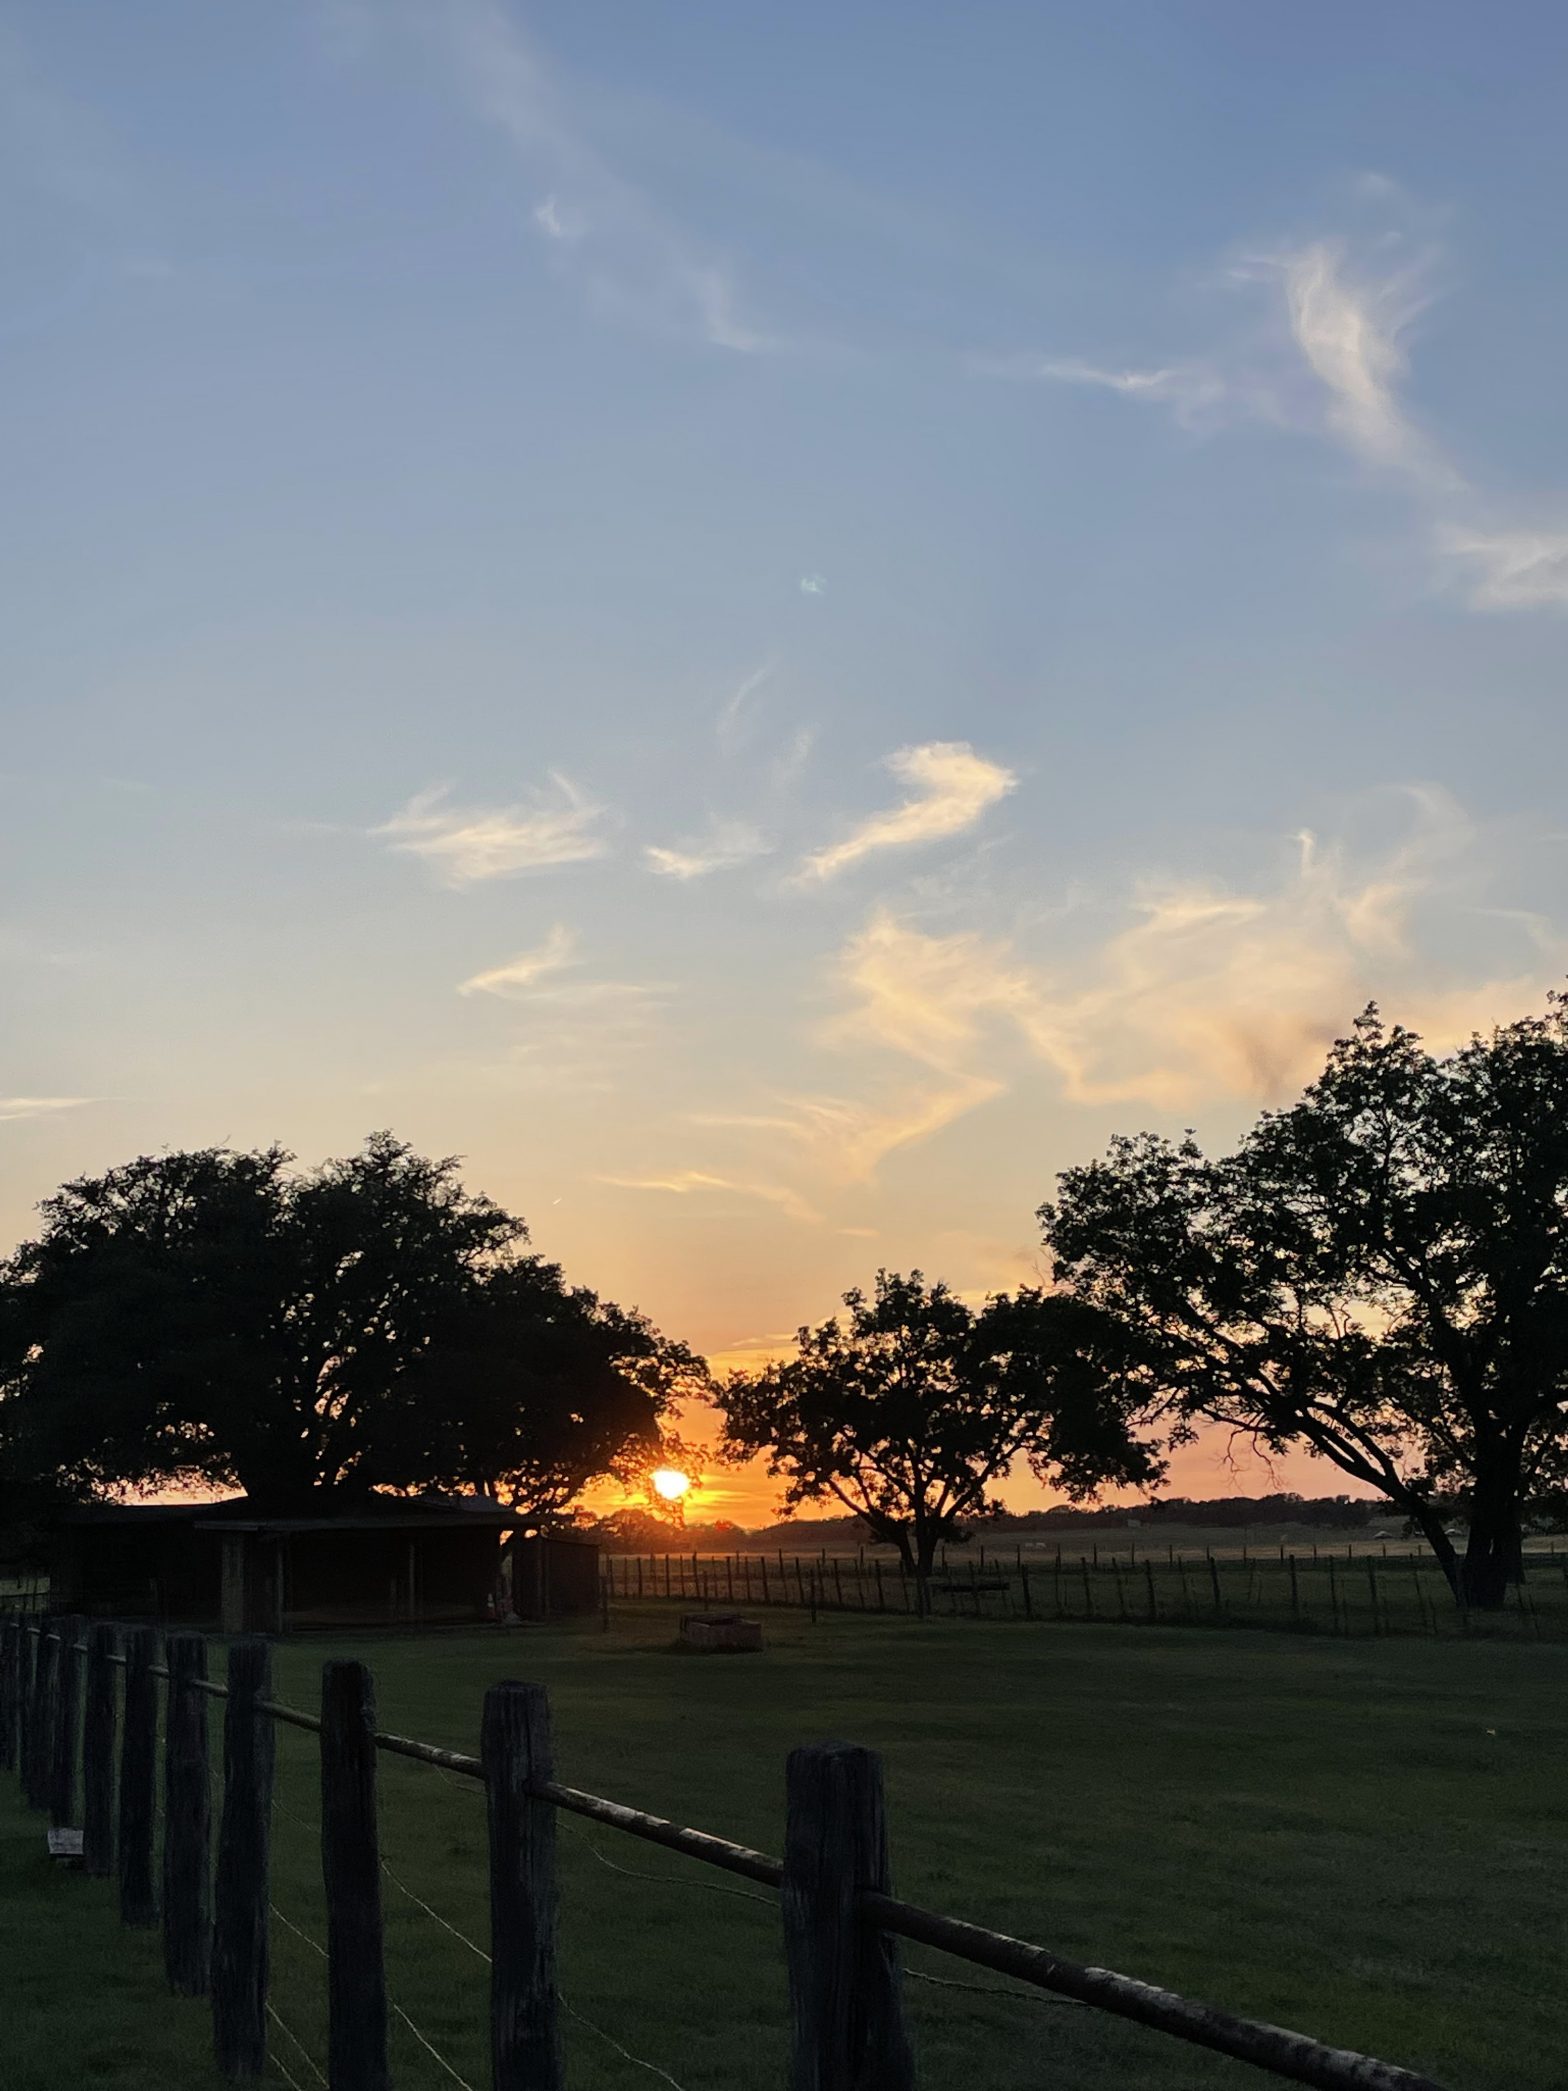 The sunset at the LBJ Ranch. The horizon is orange and the sky is blue, and some trees and a fense are visible. There are wispy clouds in the sky.